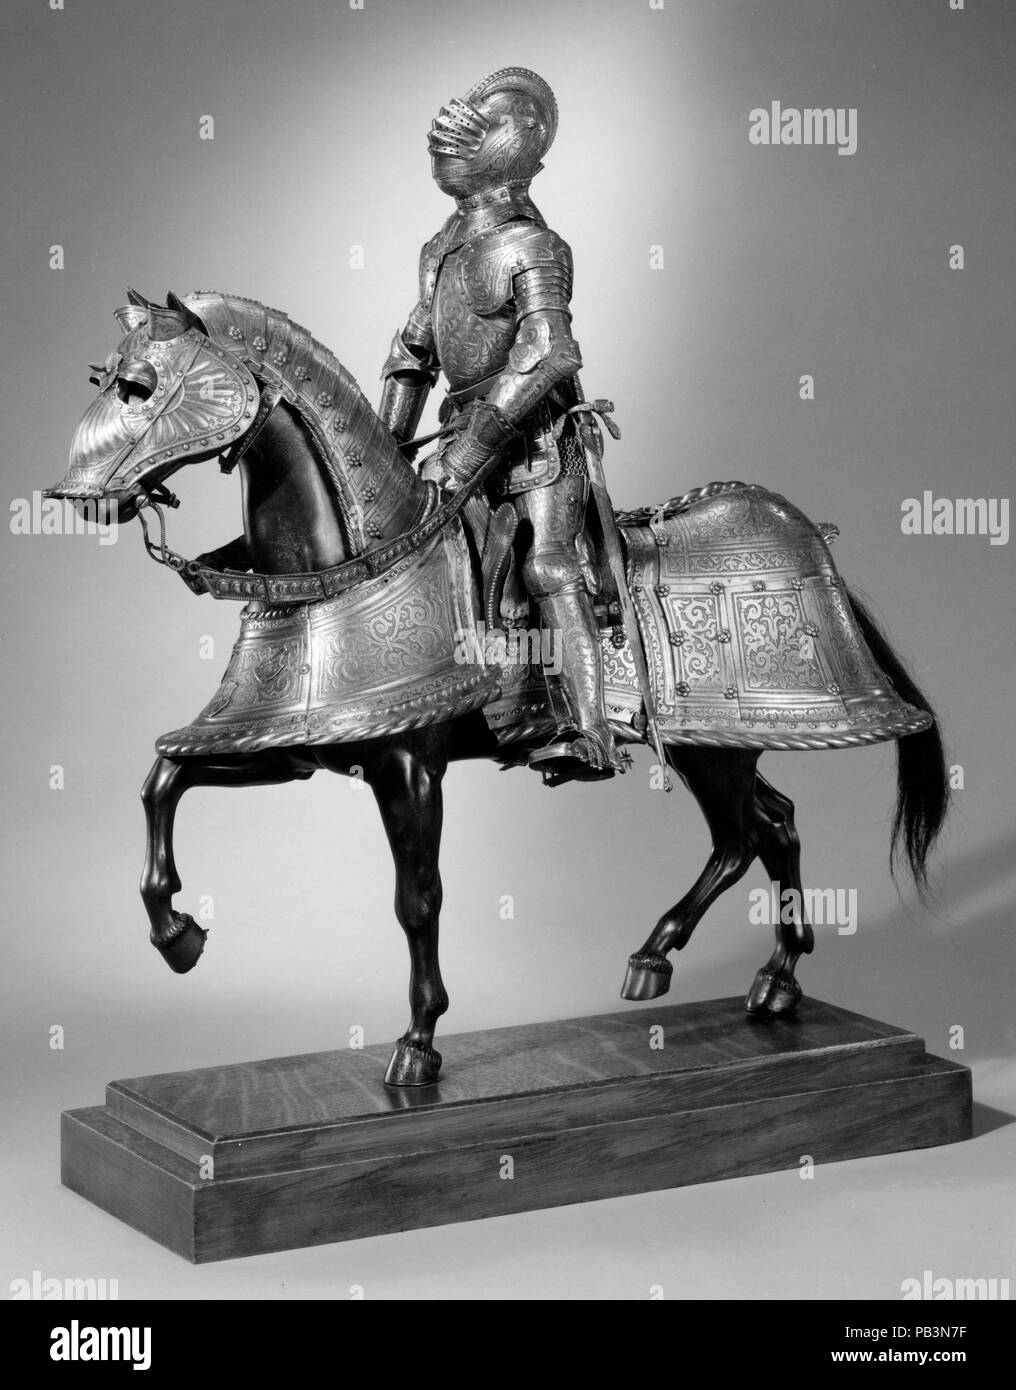 Miniature Italian-Style Armor for Man and Horse. Armorer: Possibly made by Granger LeBlanc (French, active ca. 1840-70). Culture: French. Dimensions: H. as mounted 17 7/8 in. (45.4 cm). Date: ca. 1860. Museum: Metropolitan Museum of Art, New York, USA. Stock Photo